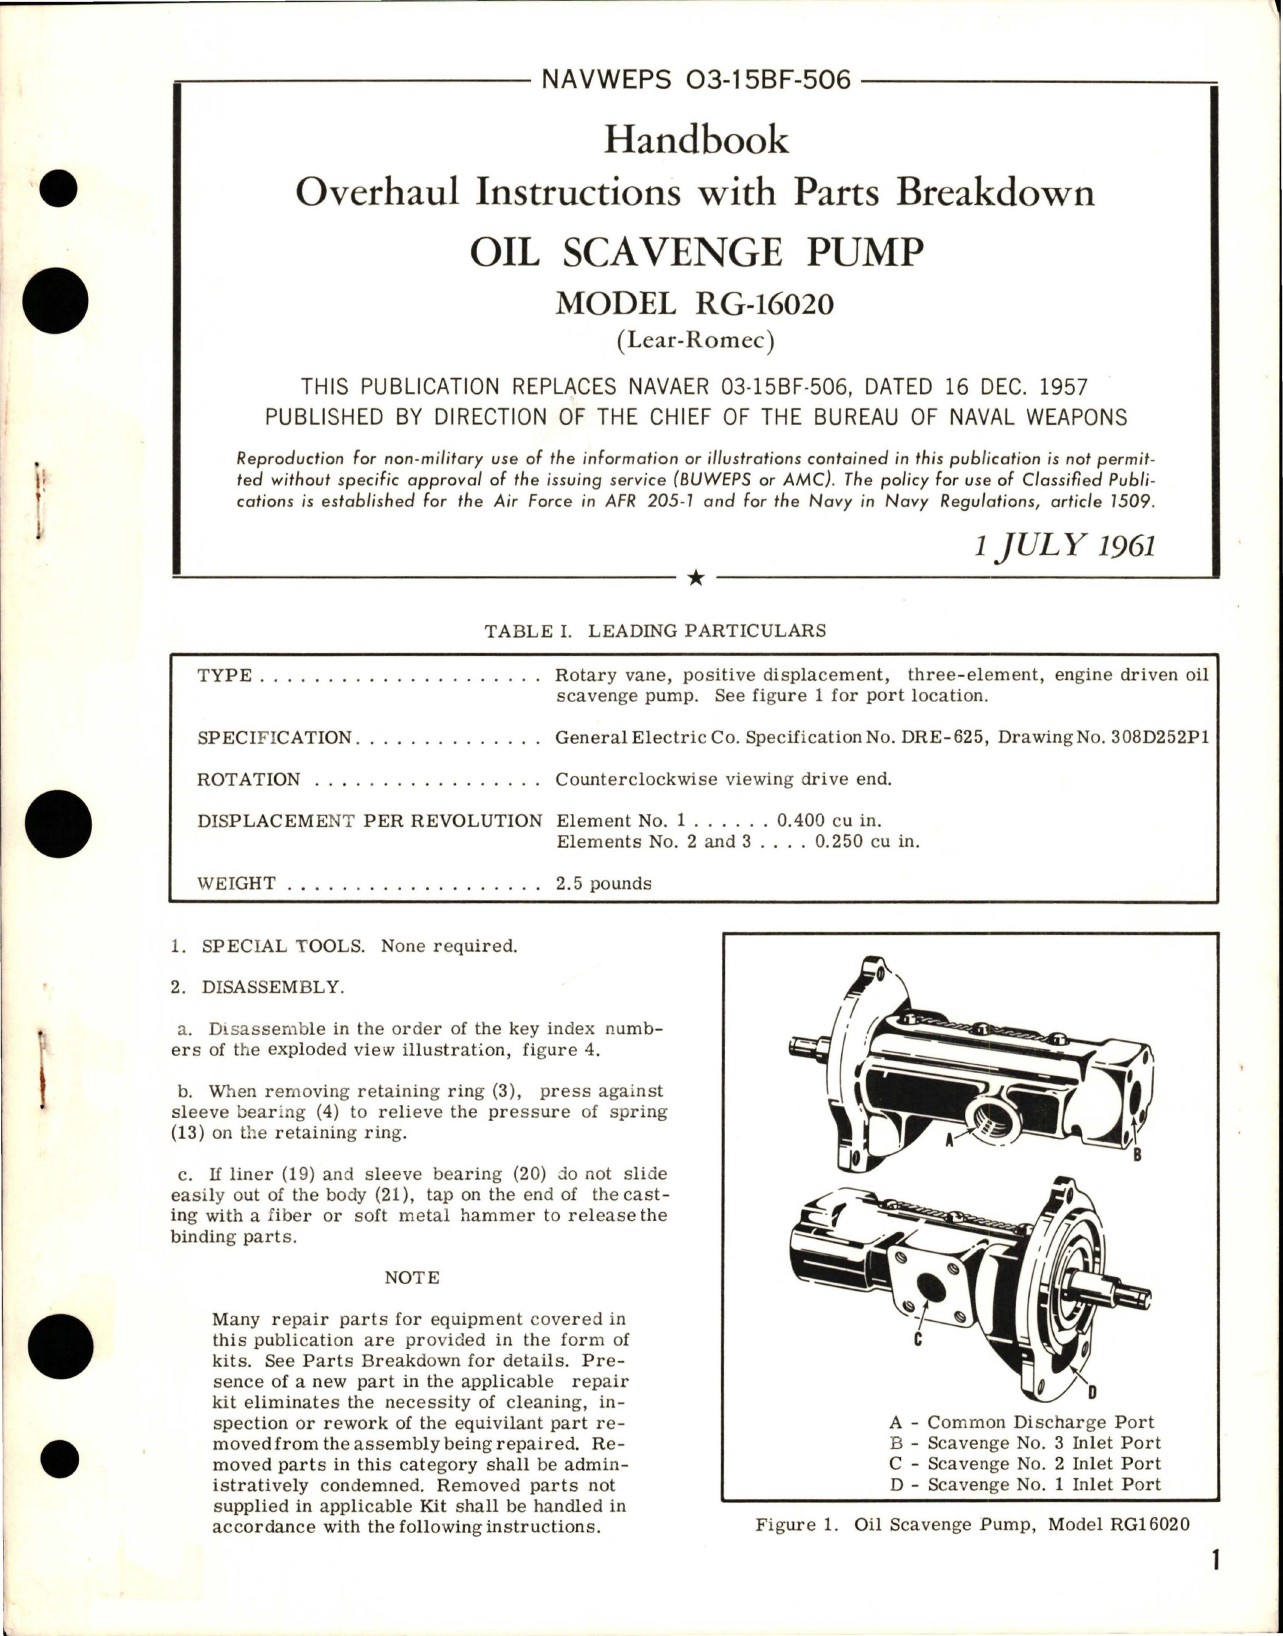 Sample page 1 from AirCorps Library document: Overhaul Instructions with Parts Breakdown for Oil Scavenge Pump - Model RG-16020